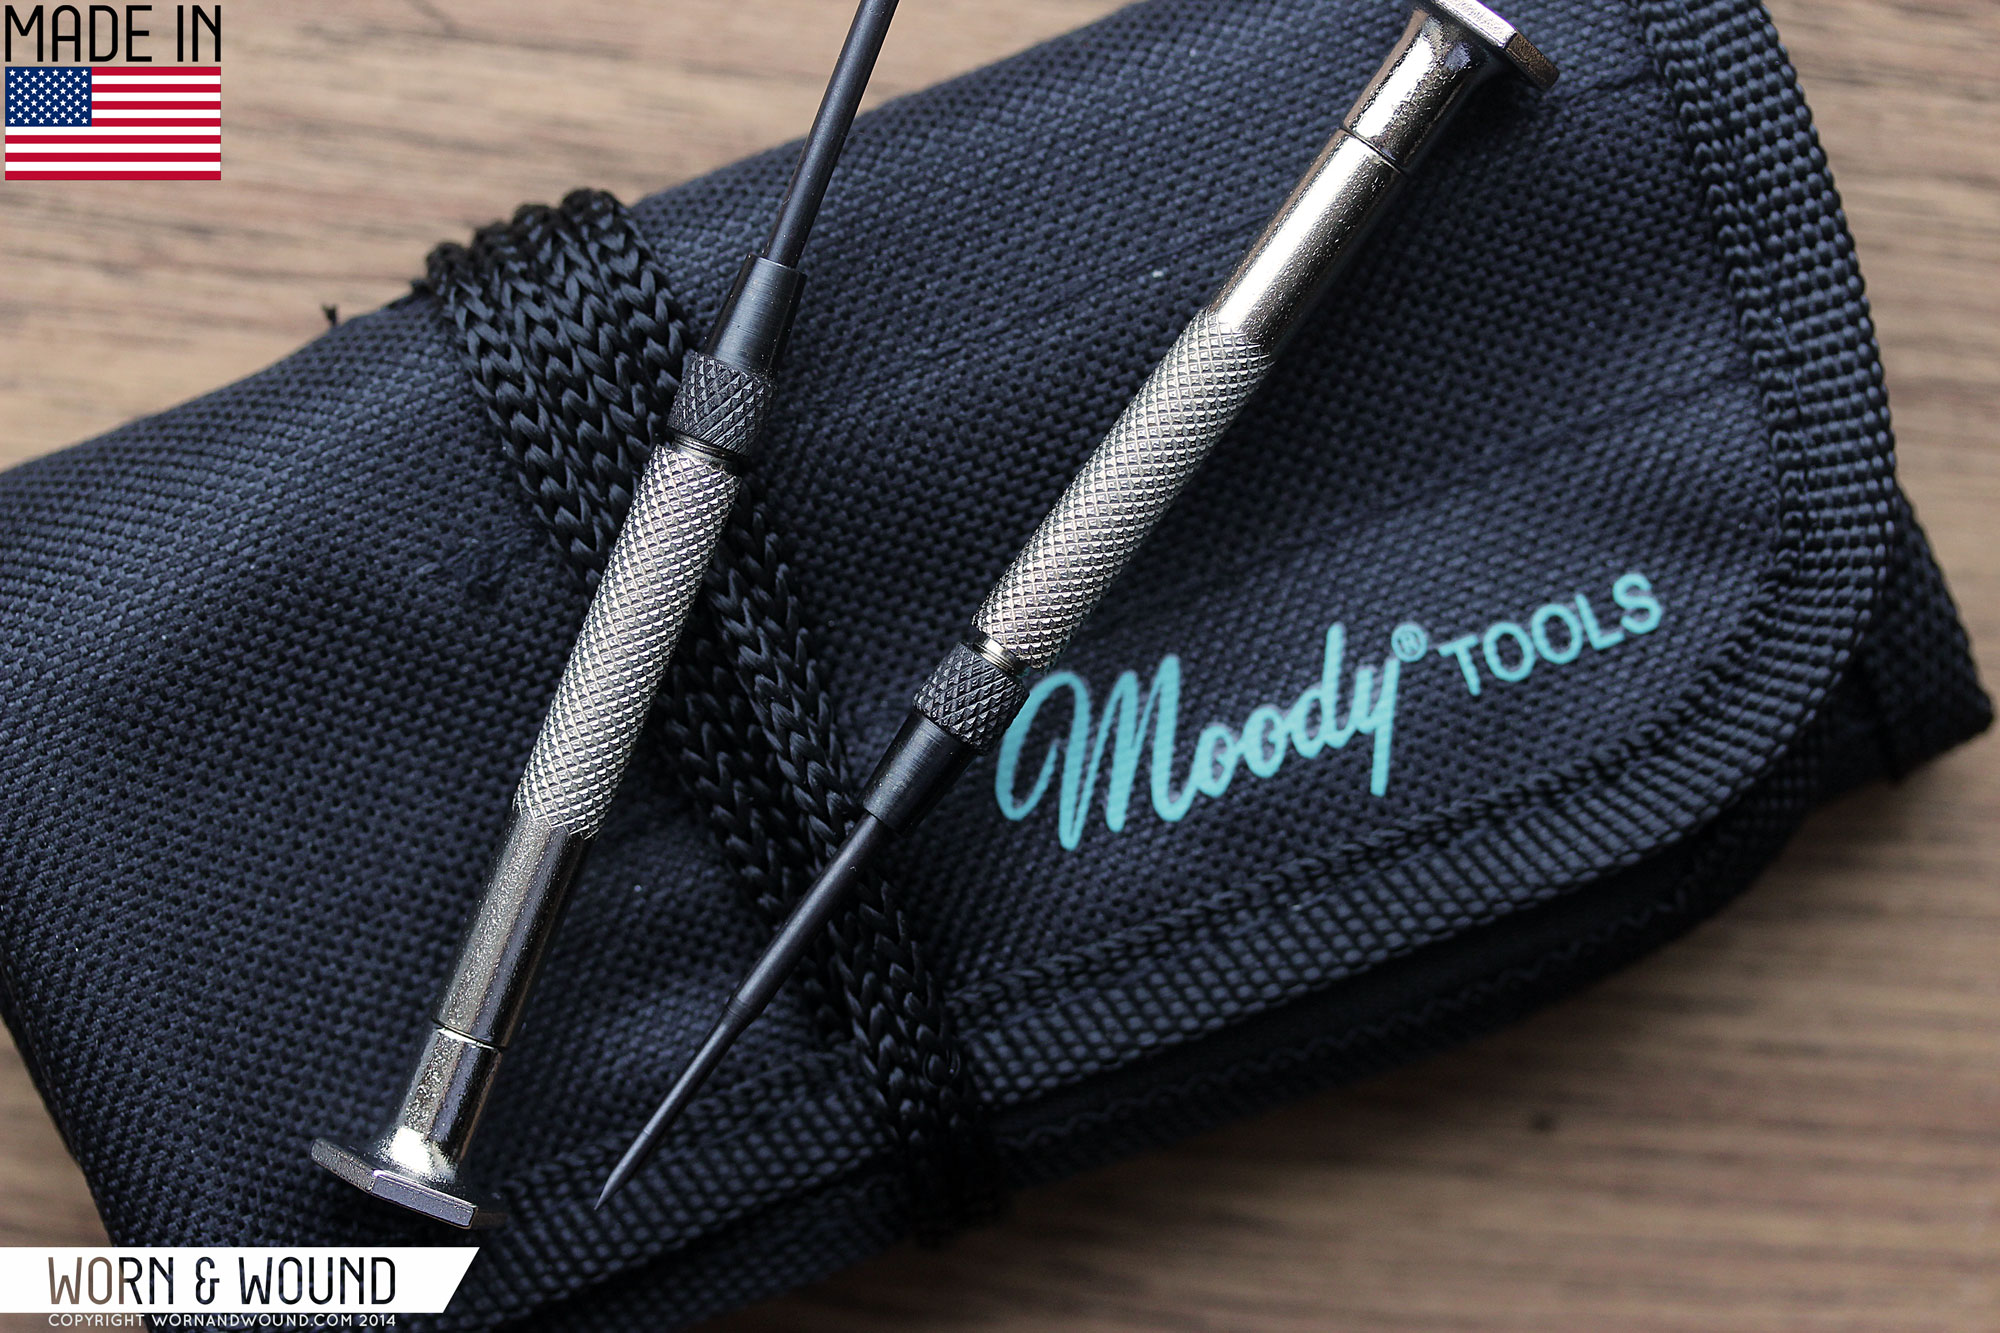 Introducing Moody Tools Screwdrivers to the w&w Shop - Worn & Wound